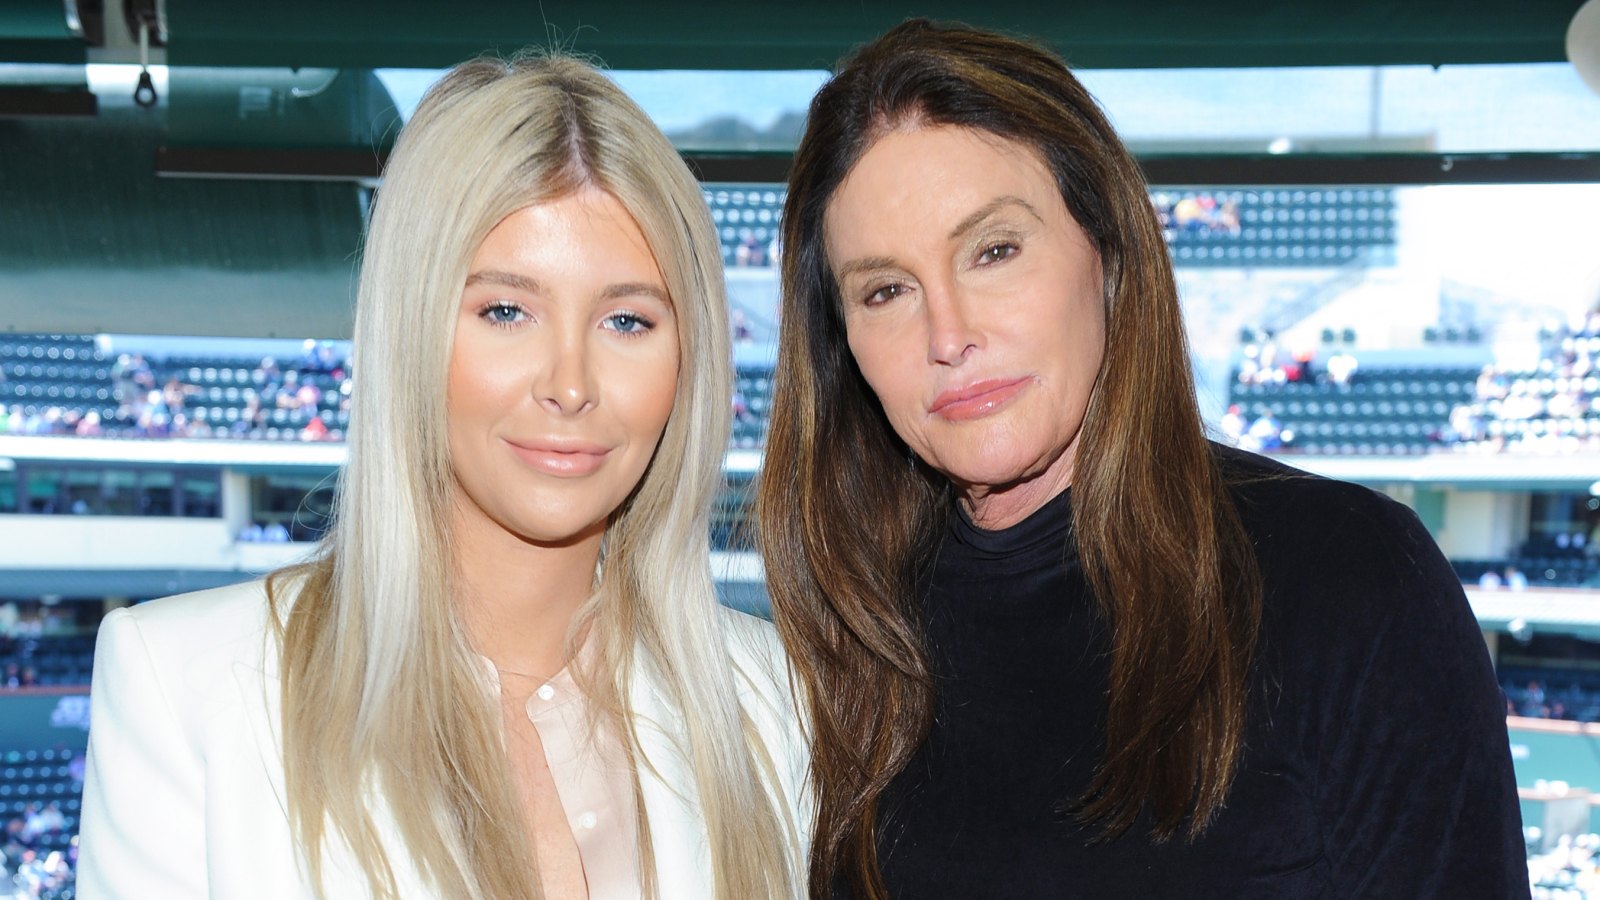 Sophia Hutchins ‘Had to Put a Lock’ on Her Door After Caitlyn Jenner ‘Decided to Barge In’ on Her With a Man